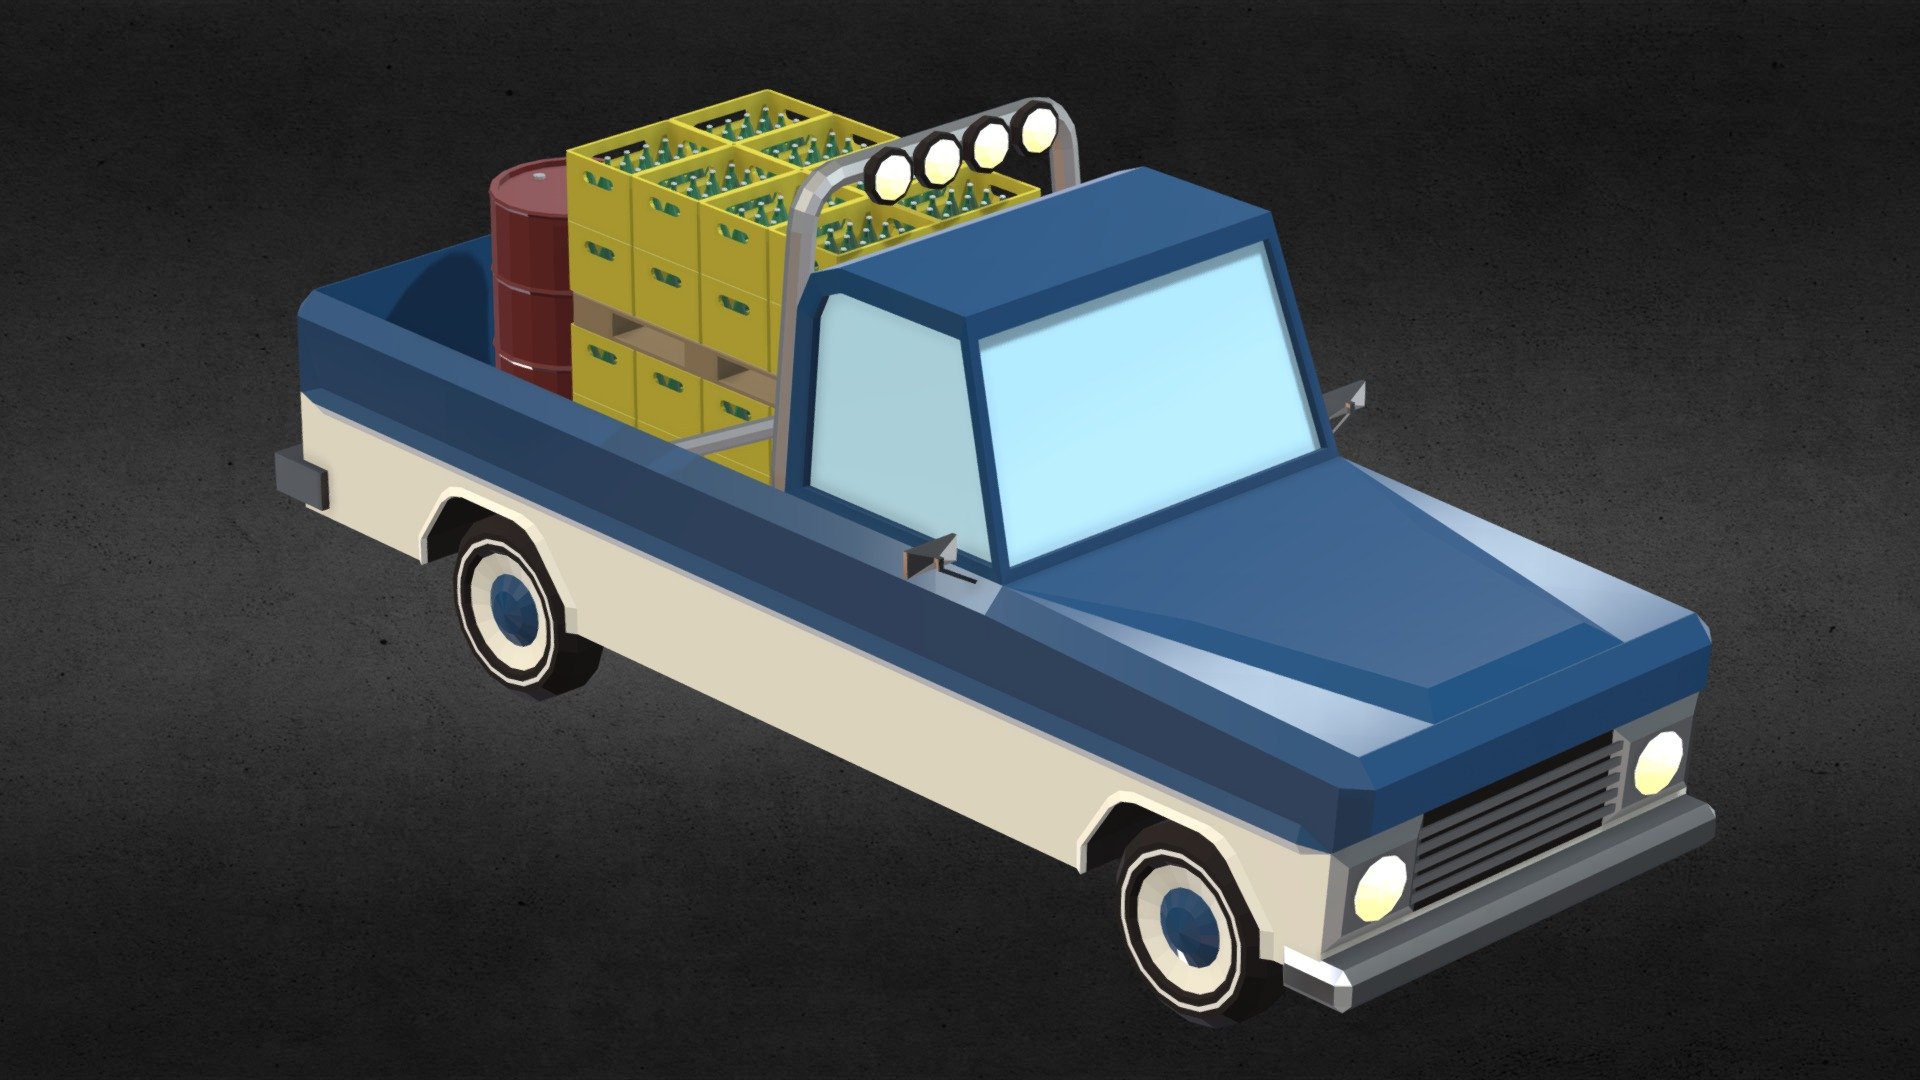 STYLIZED LOWPOLY PICKUP TRUCK ASSET CREATED IN BLENDER 3.3.1
This Pickup Truck comes with a Cargo Load System created with Geometry Nodes. You can simply pick a Cargo Item from a specific Collection to load it on the truck. Flat shaded Low Poly Art!




Vertices: 2.278

Faces: 2.175

Tris: 4.216


CARGO OBJECTS



Barrel - 316 Verts

Wooden Box - 189 Verts

Pallet - 342 Verts (Can be loaded with Pallet Load Objects)

Additional Objects can be added to the System.


PALLET LOAD OBJECTS



Parcel - 156 Verts

Beverage Crate - 1.444 Verts (with Bottles) - 464 Verts (empty)

Additional Objects can be added to the System.


MATERIALS
Materials for Eevee Render Engine included. Beverage Crate and Barrel Color randomly changing per Instance. Wood Color randomly variants in a specific Hue-Range per Instance.


NOT APPLIED MODIFIERS



Mirror

Bevel

Geometry Nodes: Truck Options

Geometry Nodes: Cargo Loader

Geometry Nodes: Pallet Loader


ASSET
Preview Image for Blender’s Asset Browser included 3d model